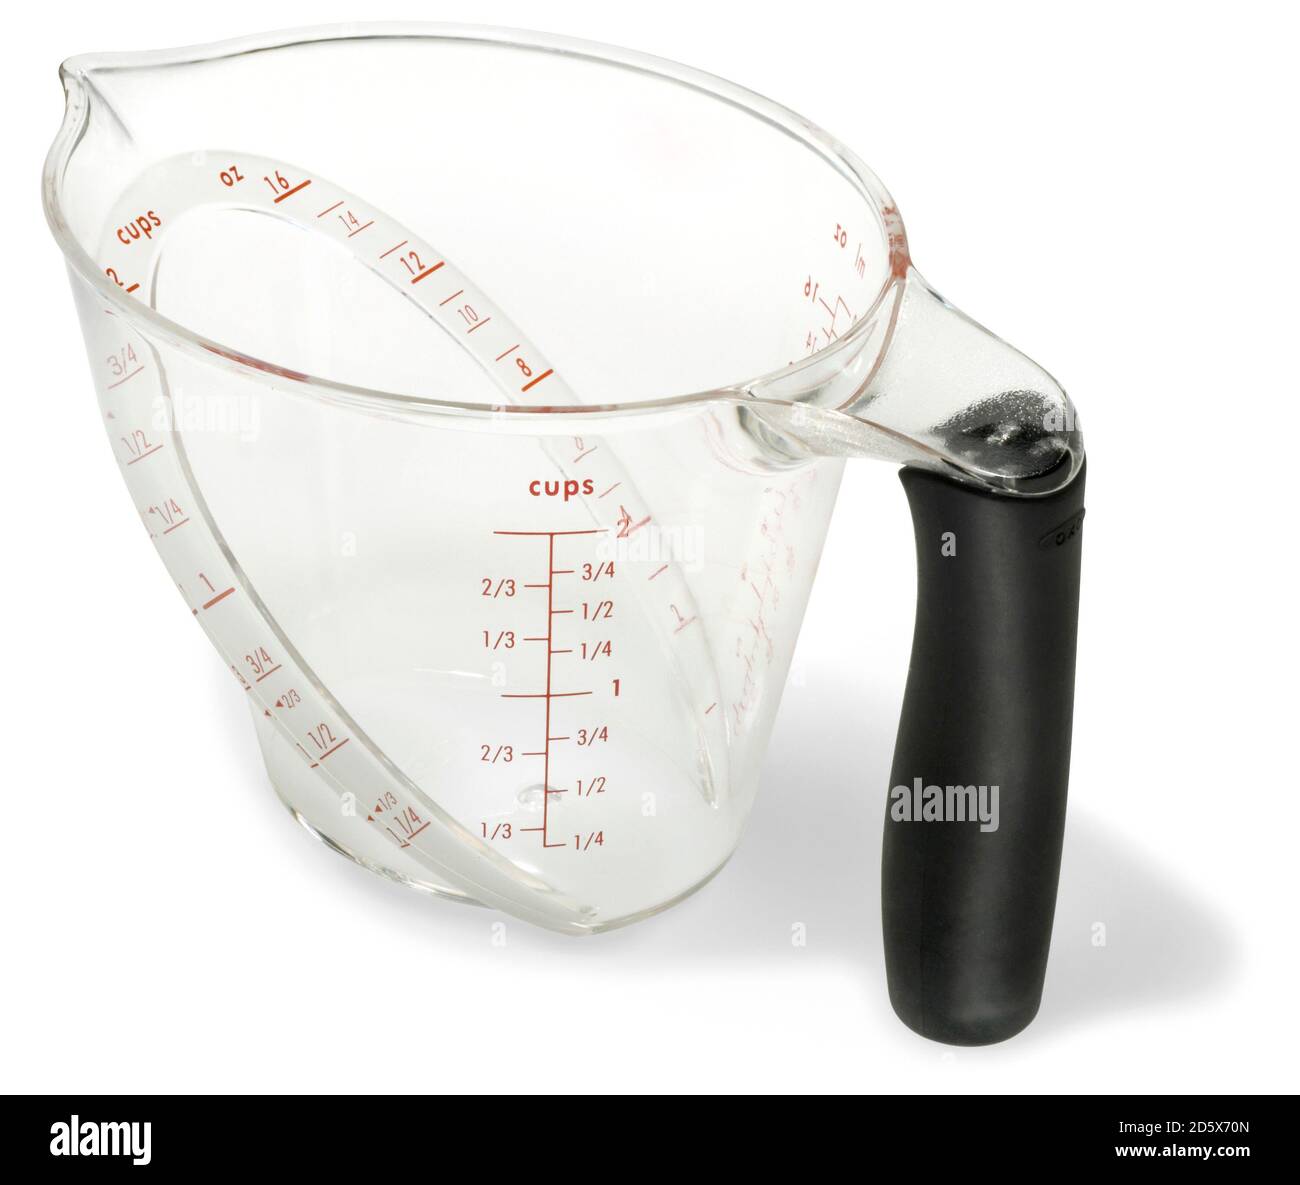 https://c8.alamy.com/comp/2D5X70N/oxo-brand-2-cup-measuring-cup-photographed-on-a-white-background-2D5X70N.jpg